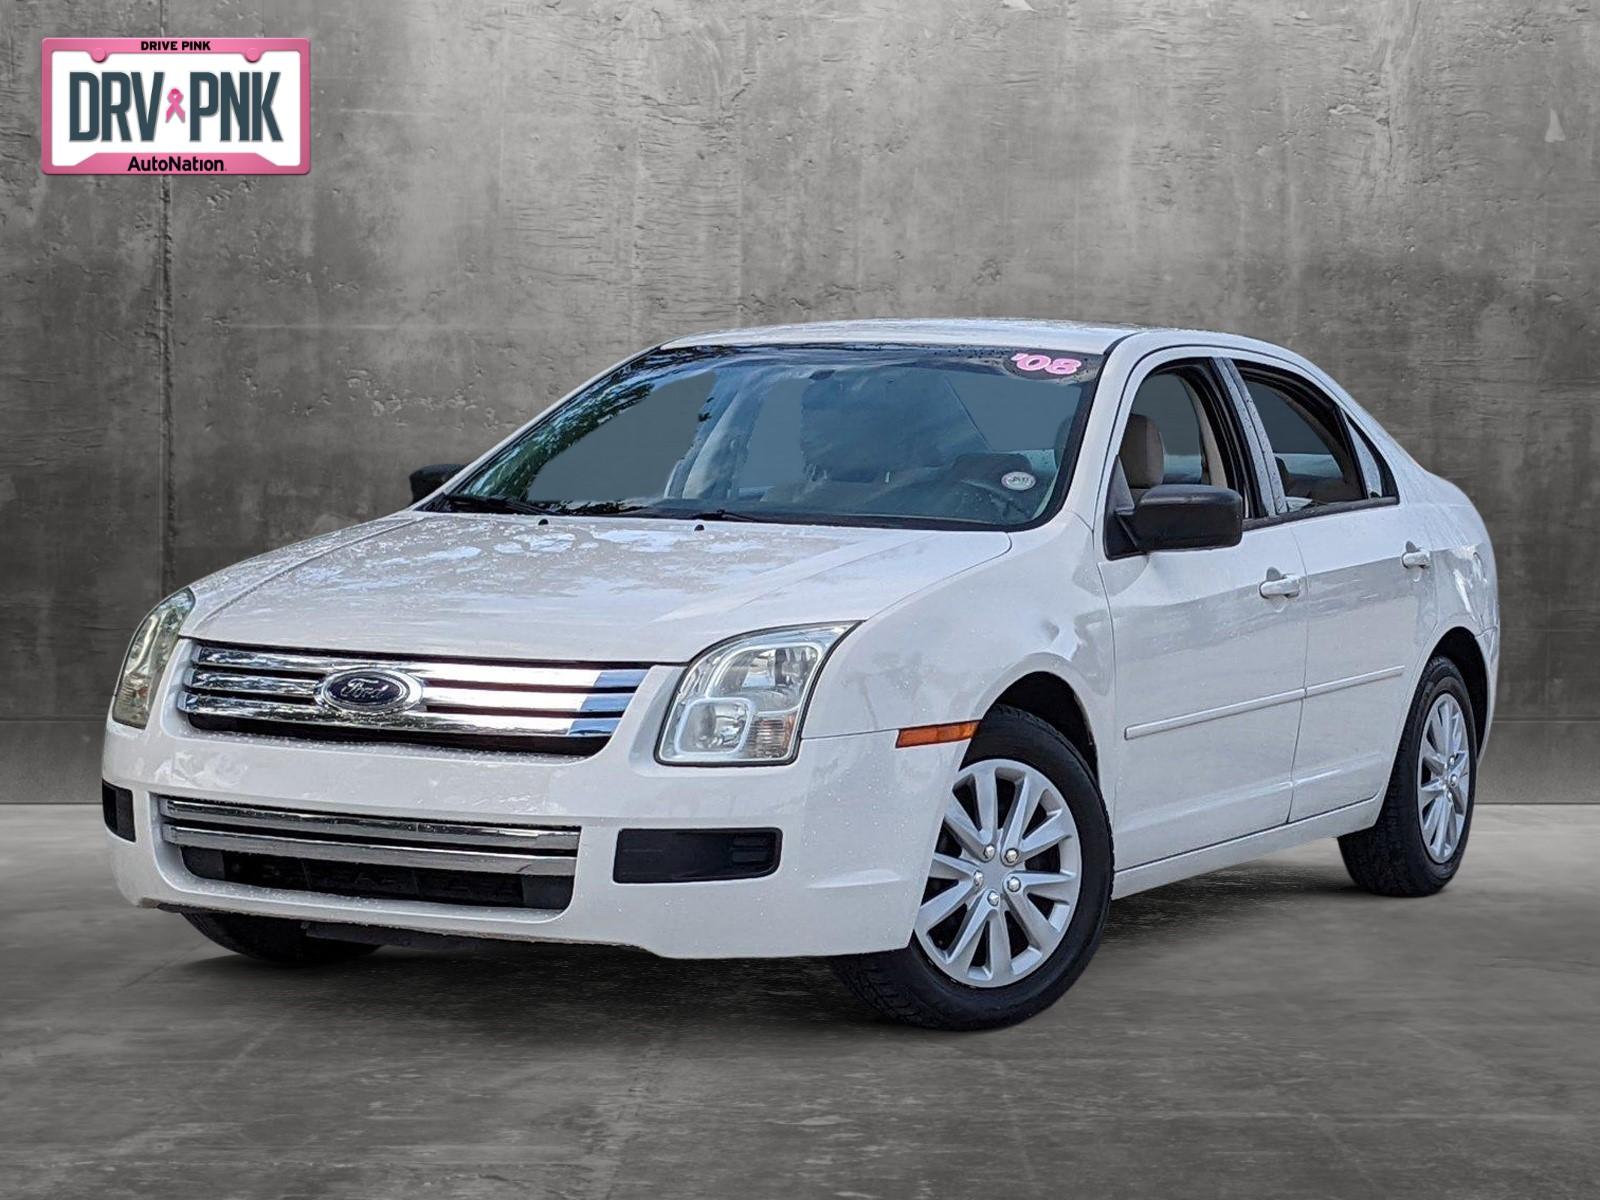 2008 Ford Fusion Vehicle Photo in Davie, FL 33331